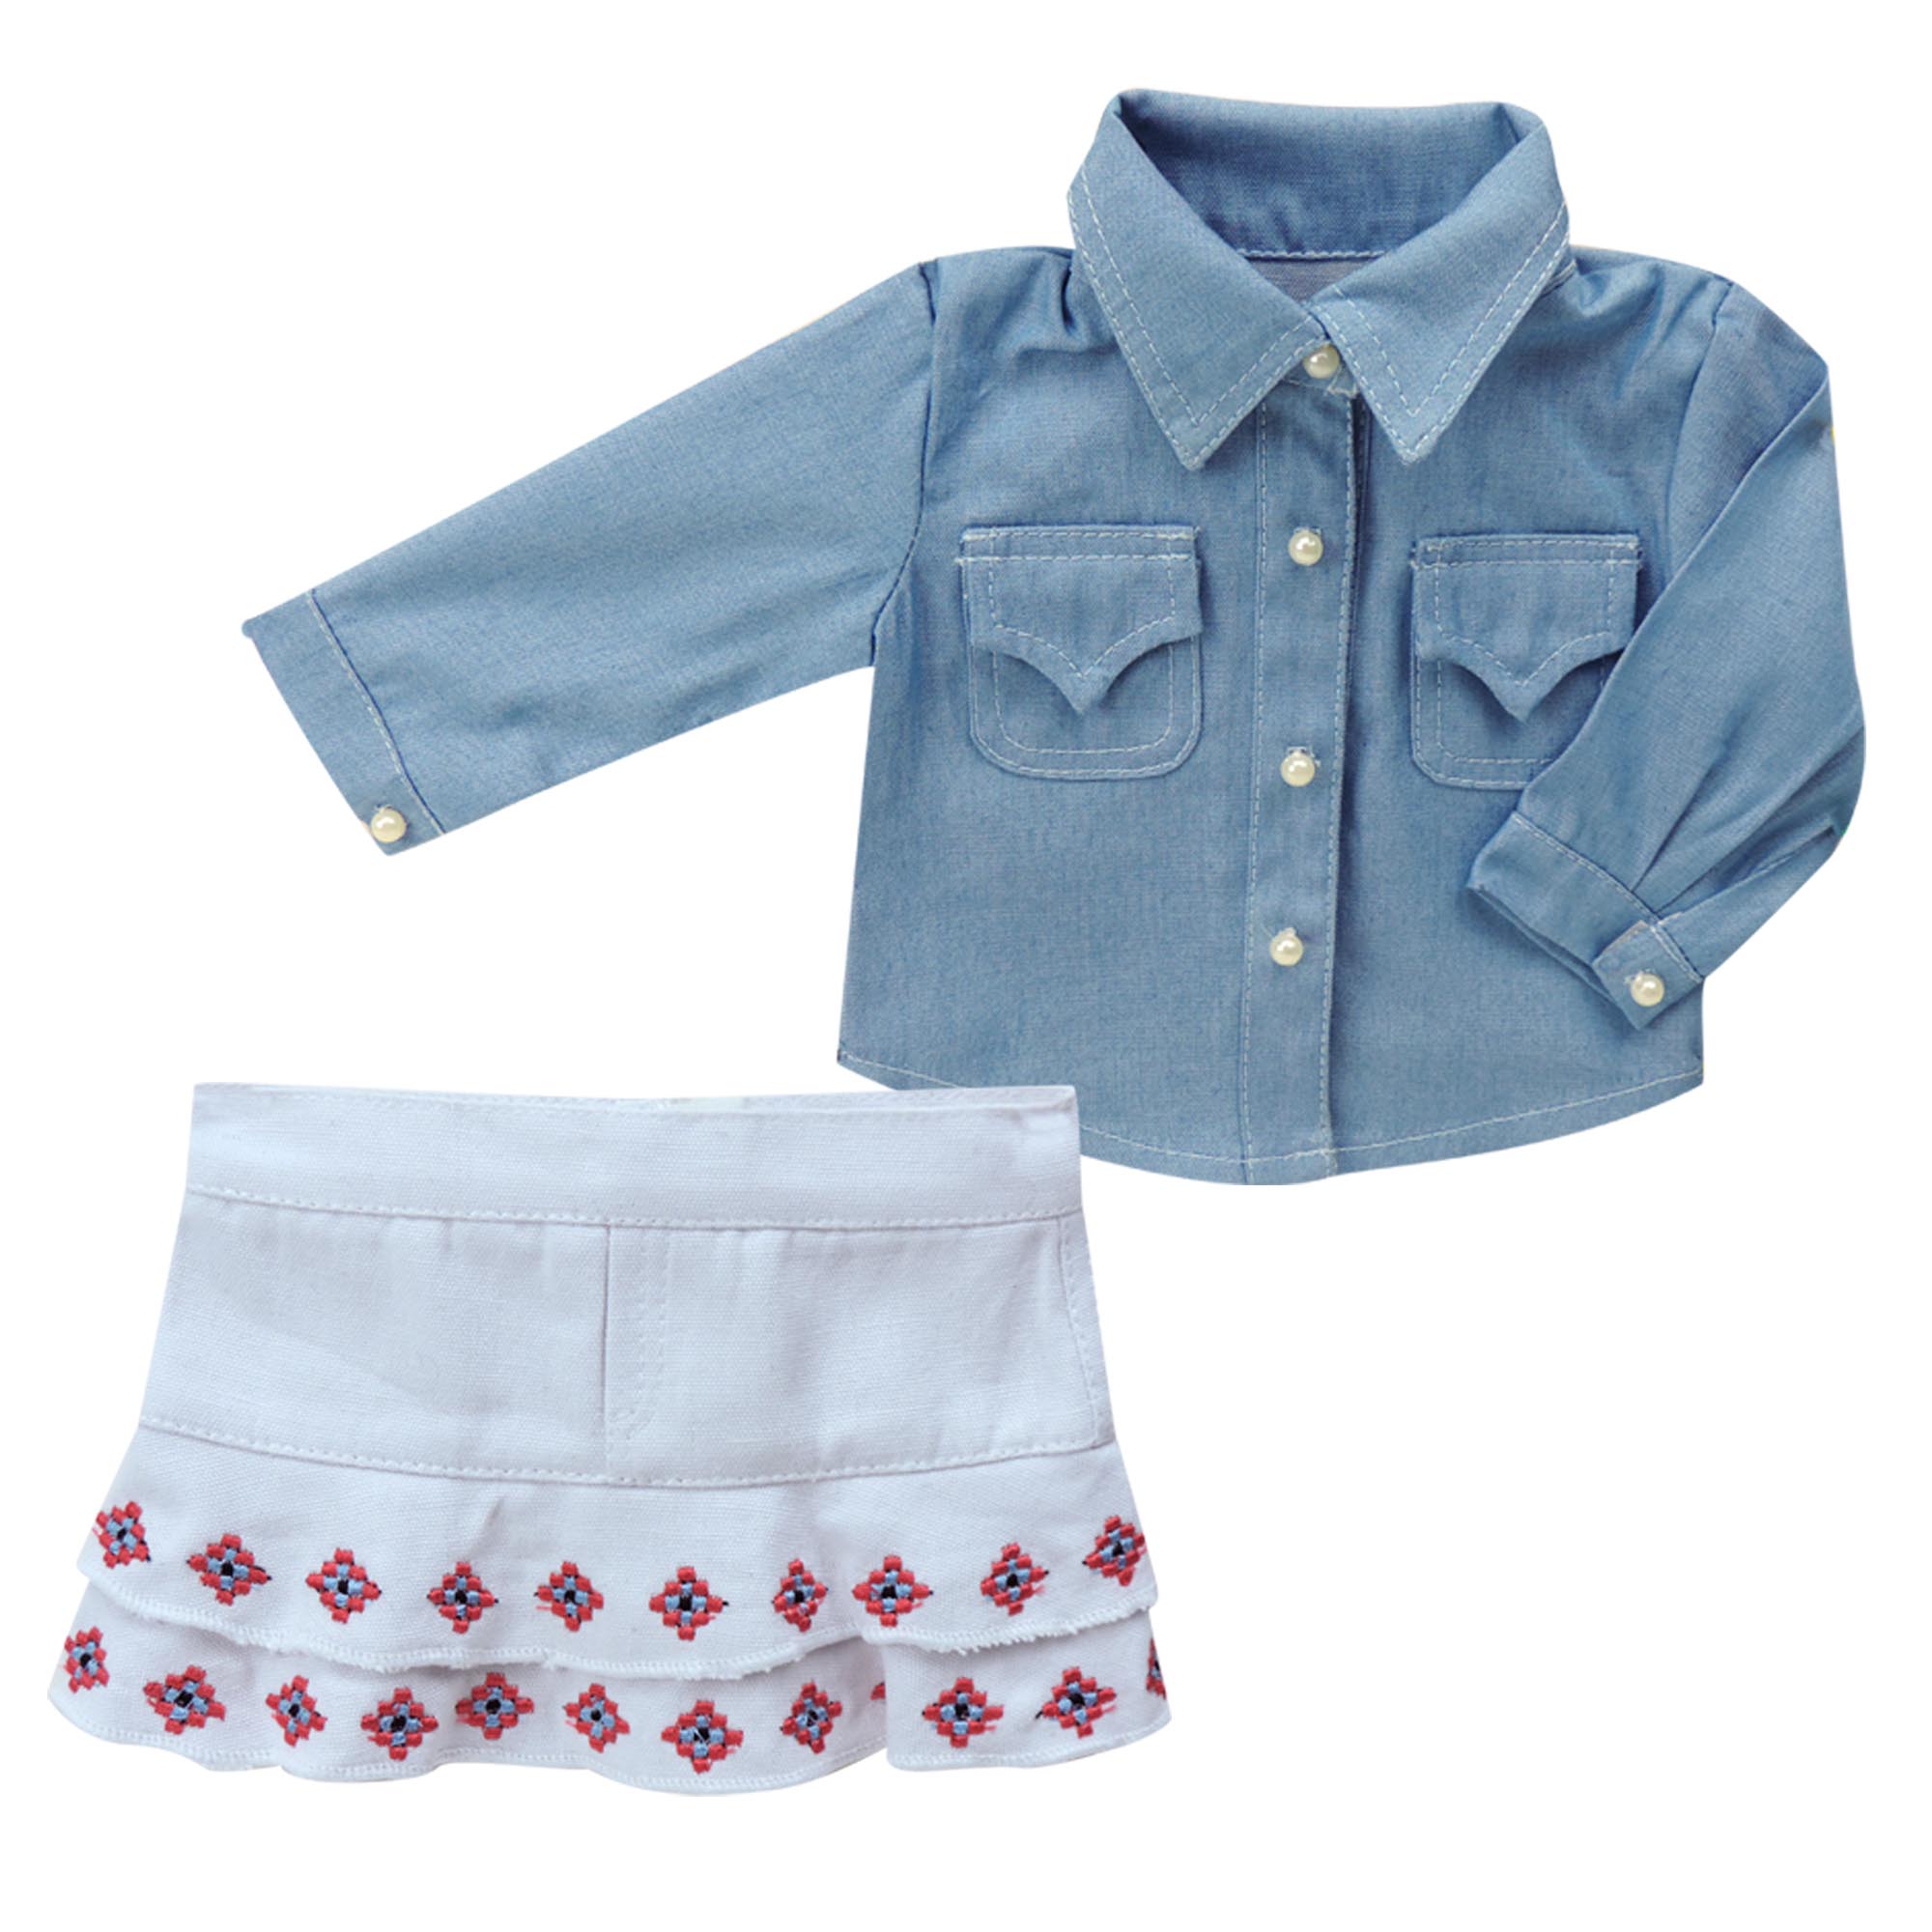 Sophia’s Southwest Chic Chambray Button-Up Shirt & White Denim Skirt with Craft Art Embroidered Details Complete Outfit for 18” Dolls, Light Blue